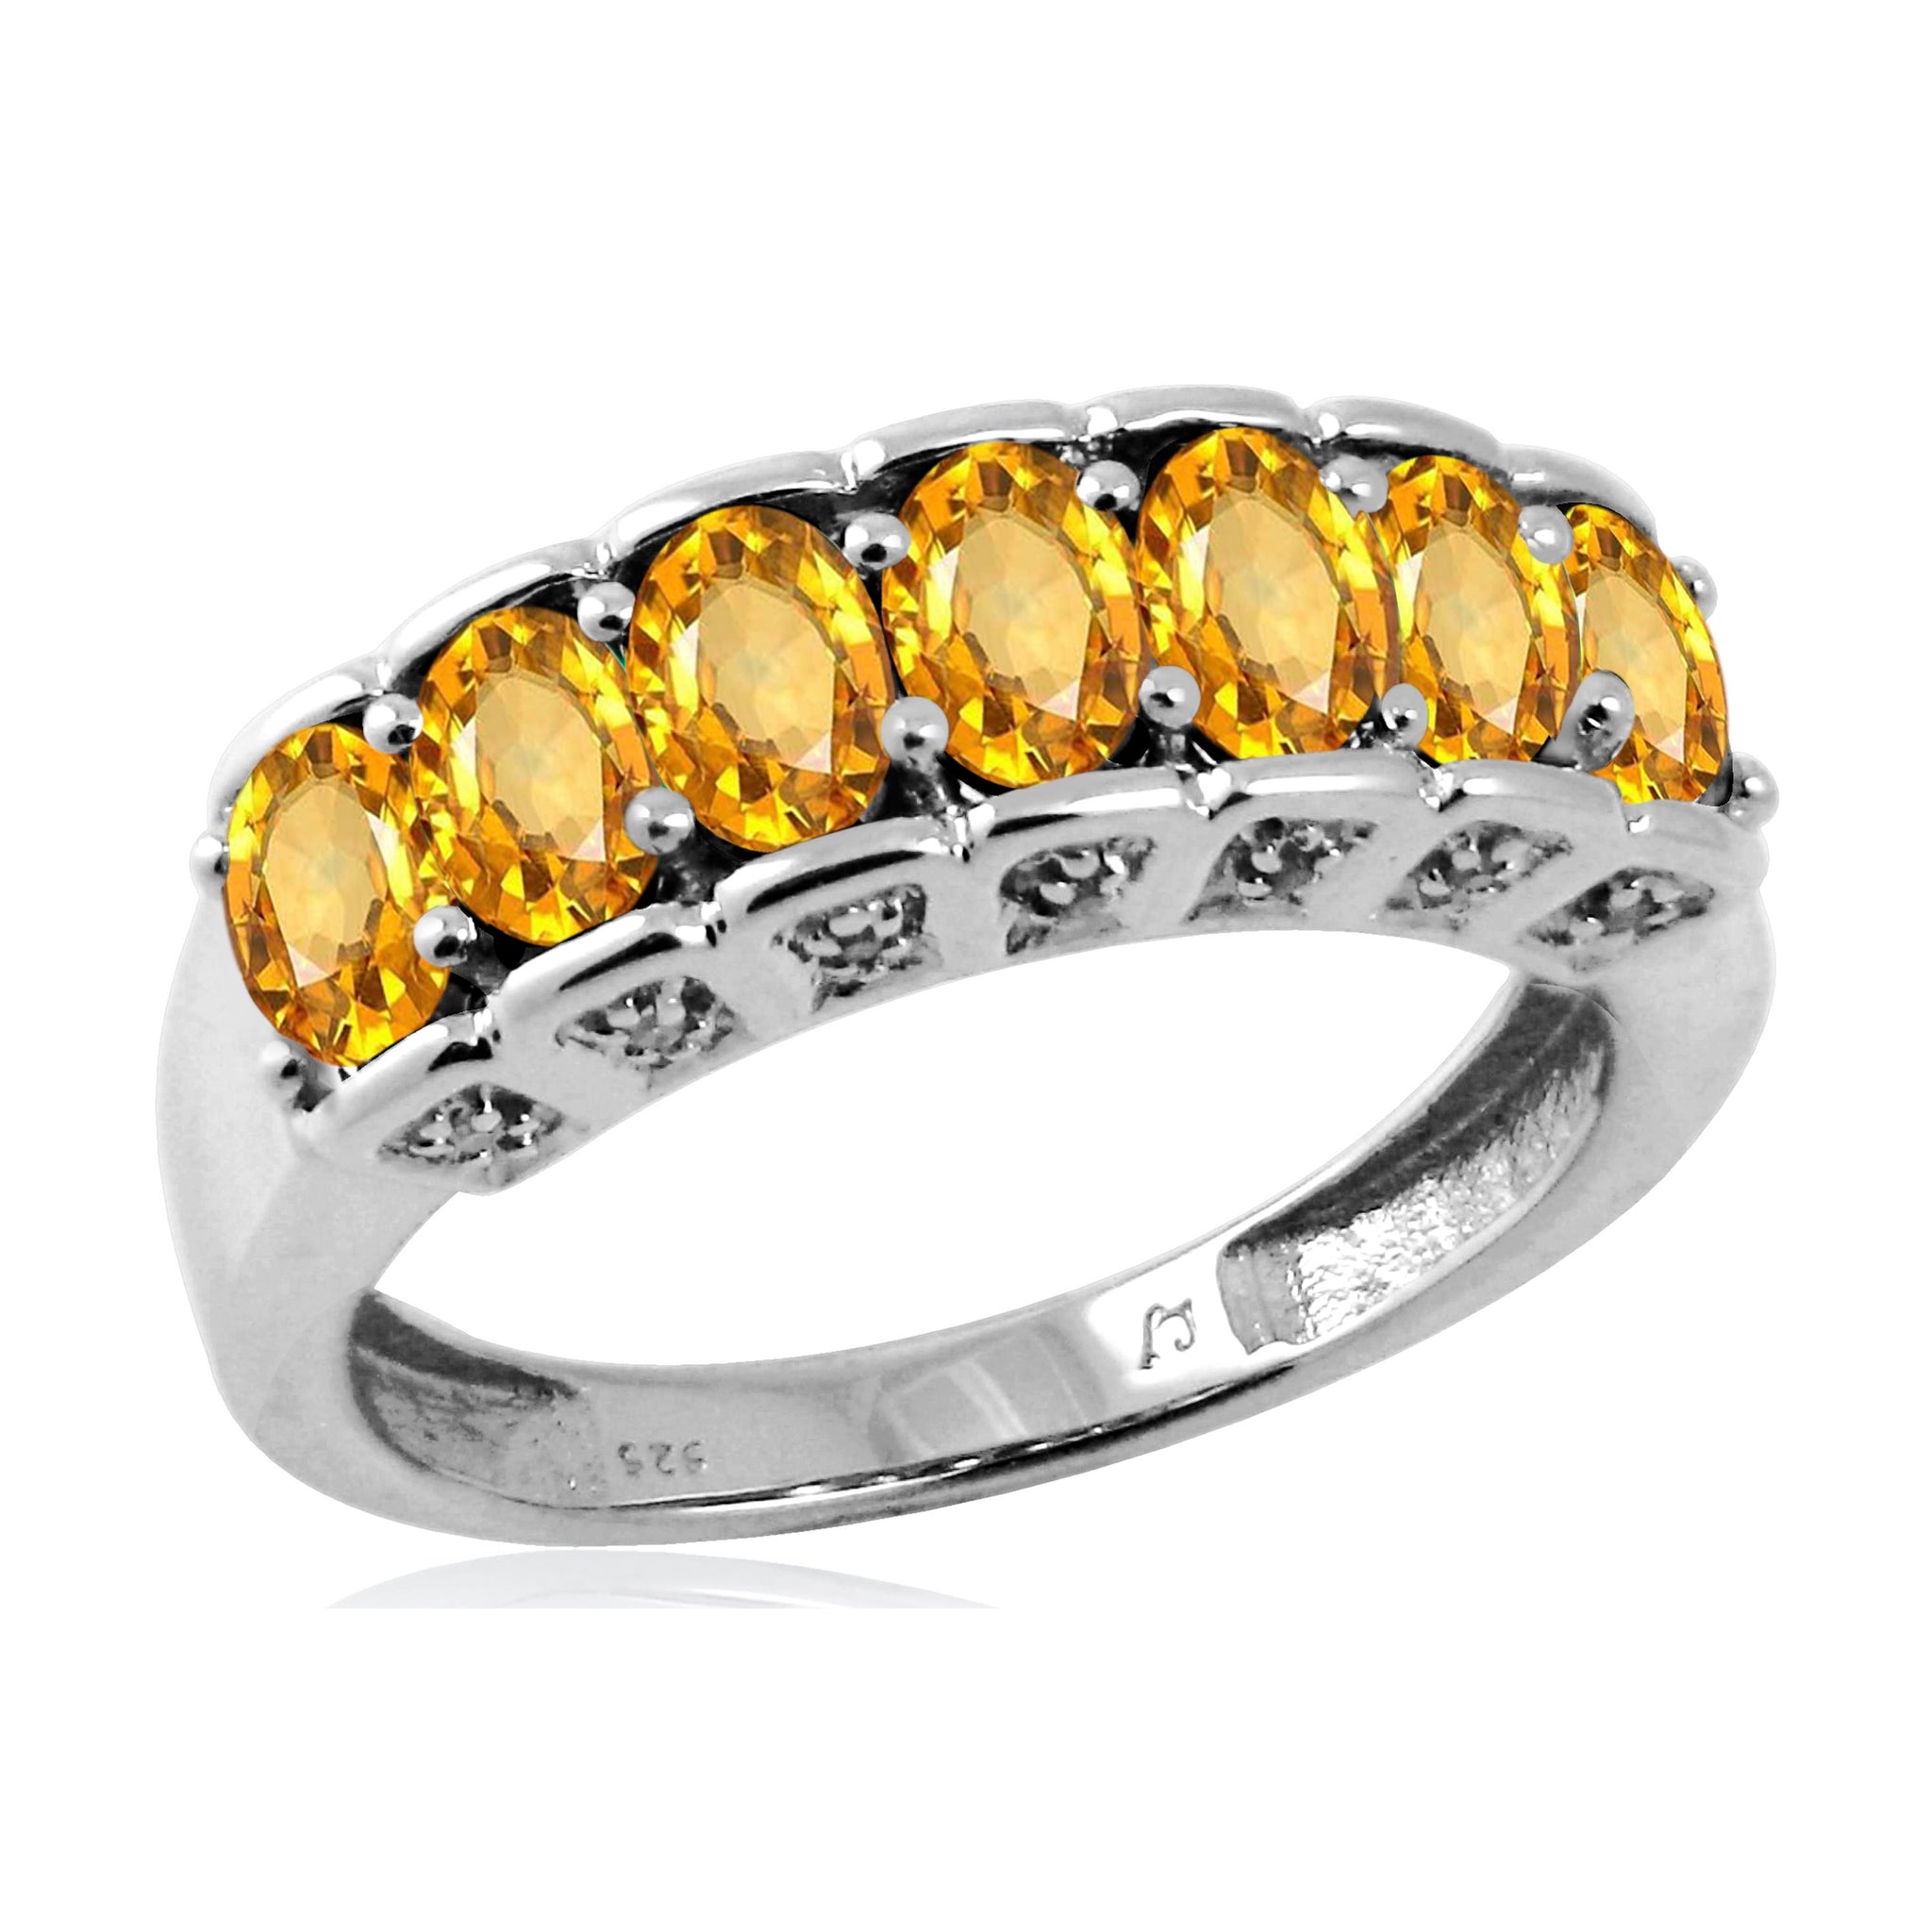 JewelonFire 1 1/2 Carat T.G.W. Citrine And White Diamond Accent Sterling Silver Ring - Assorted Colors